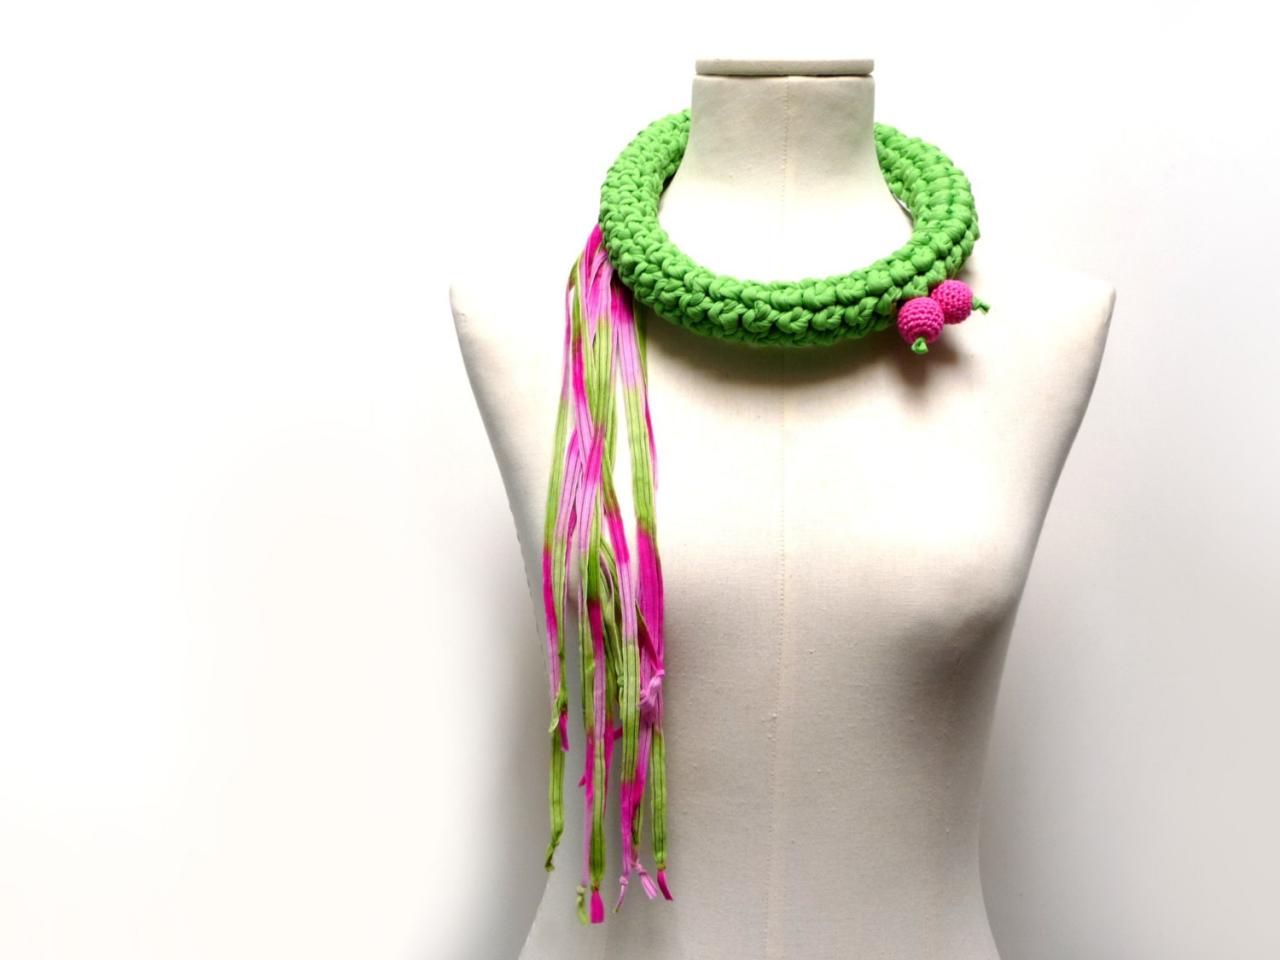 Crochet Statement Necklace - Lime Green Upcycled Jersey Yarn And Pink Ribbons - Jersey Scarf Cowl - Crochet Jewelry - Textile Necklace